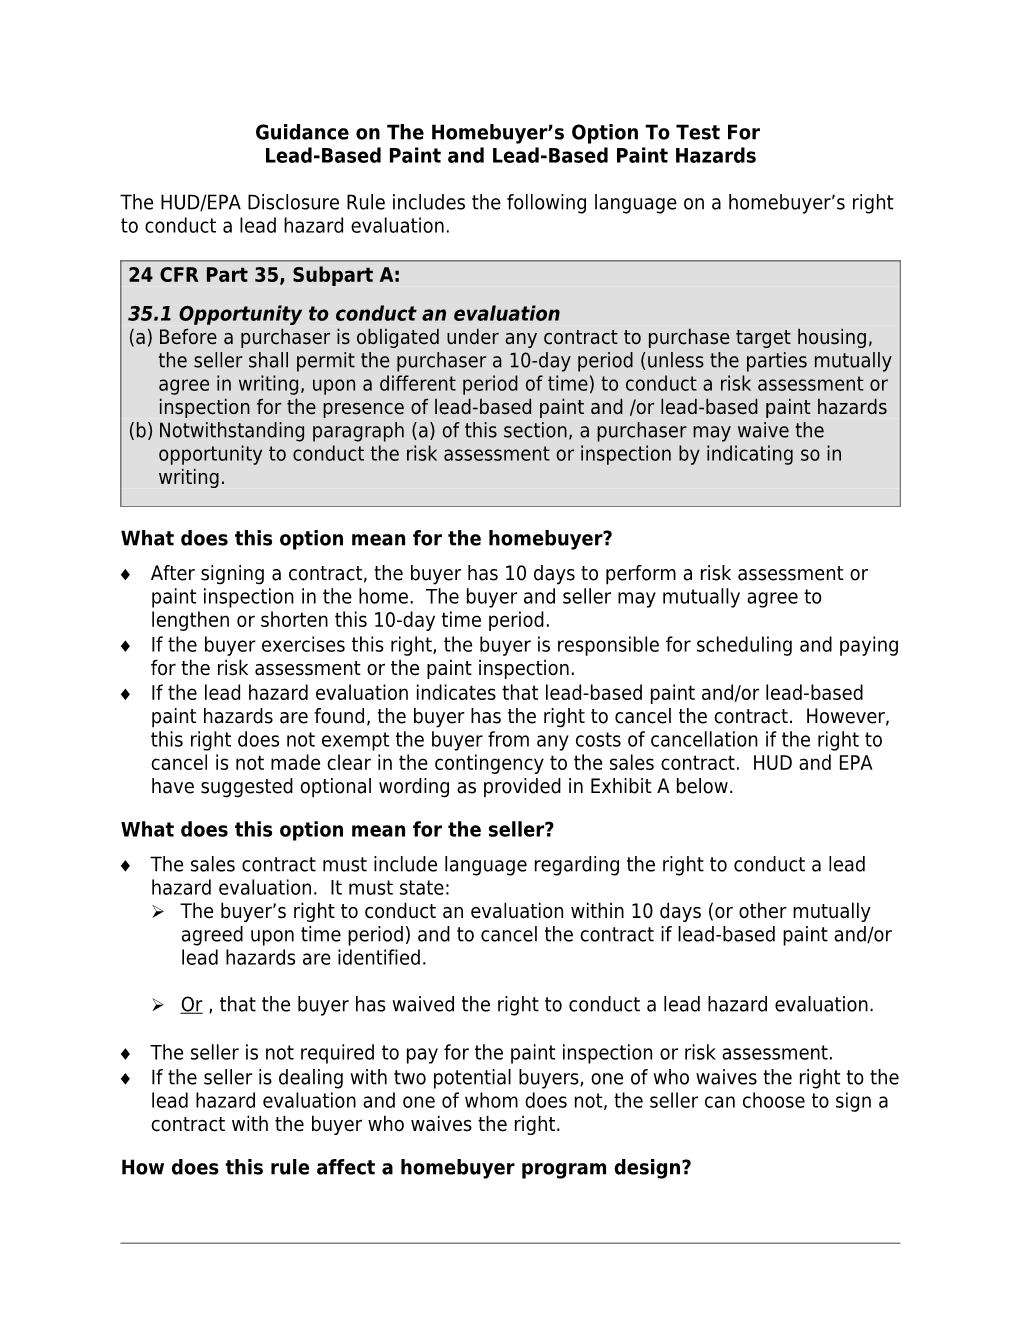 Guidance on the Homebuyer S Option to Test for Lead-Based Paint and Lead-Based Paint Hazards